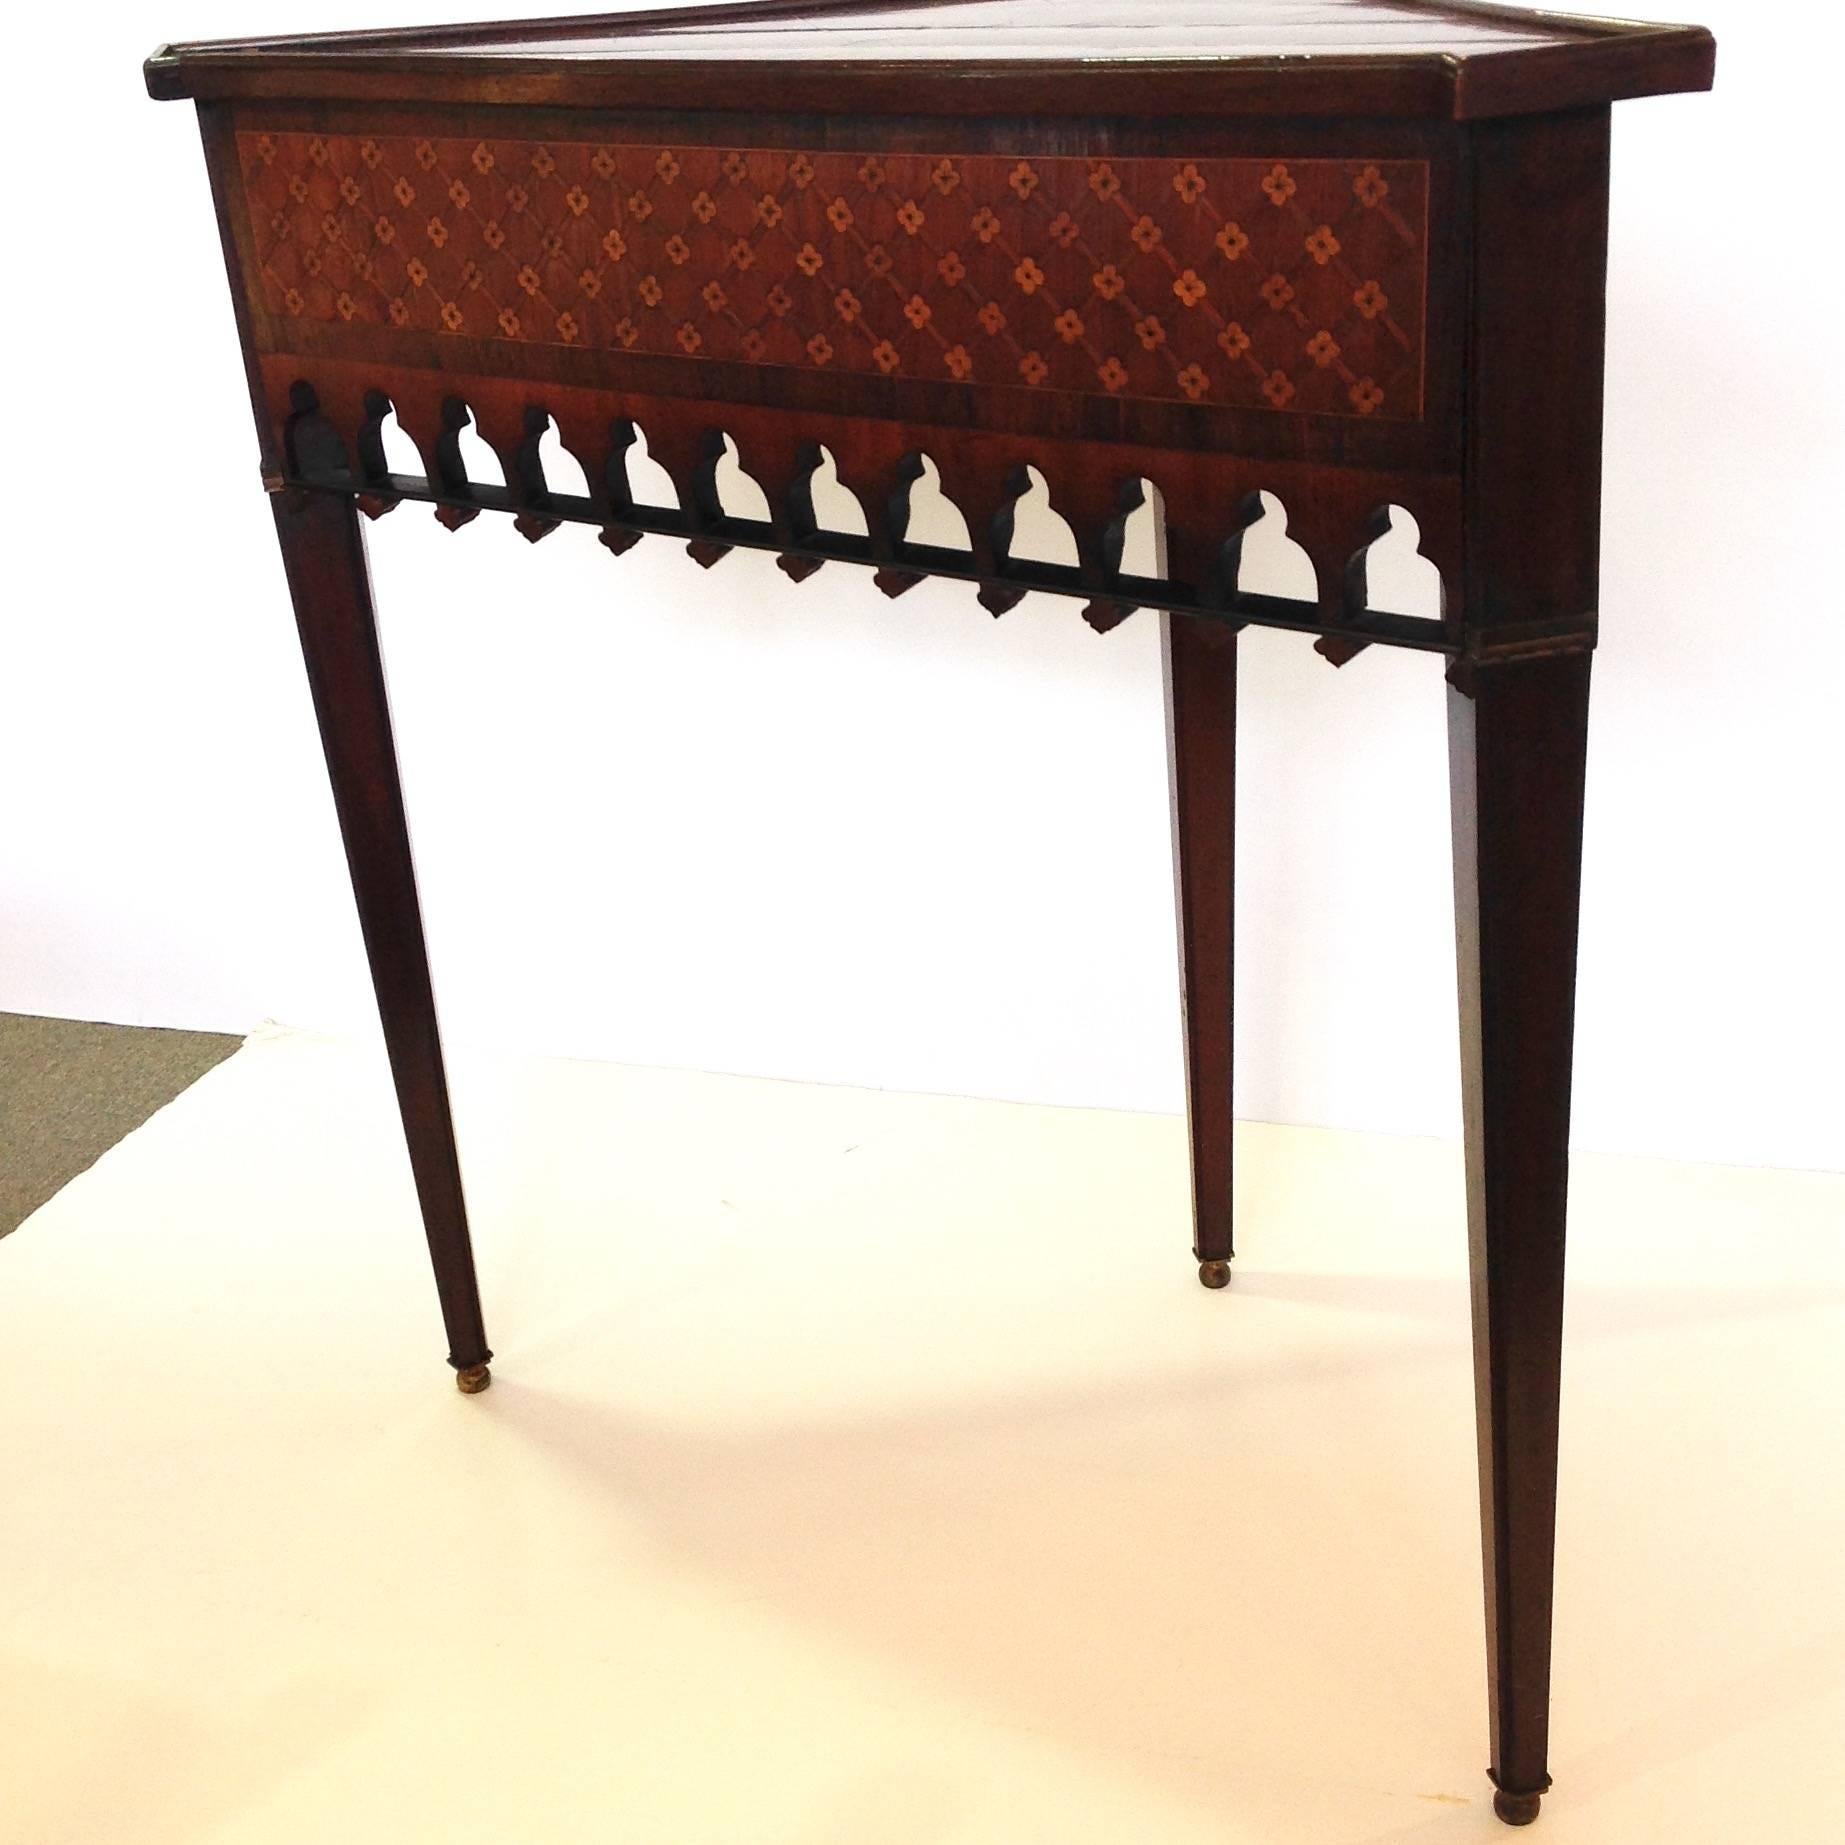 Gothic Revival corner table with inlaid floral lattice on apron and shaped front corners. It is possibly Dutch, early 19th century.